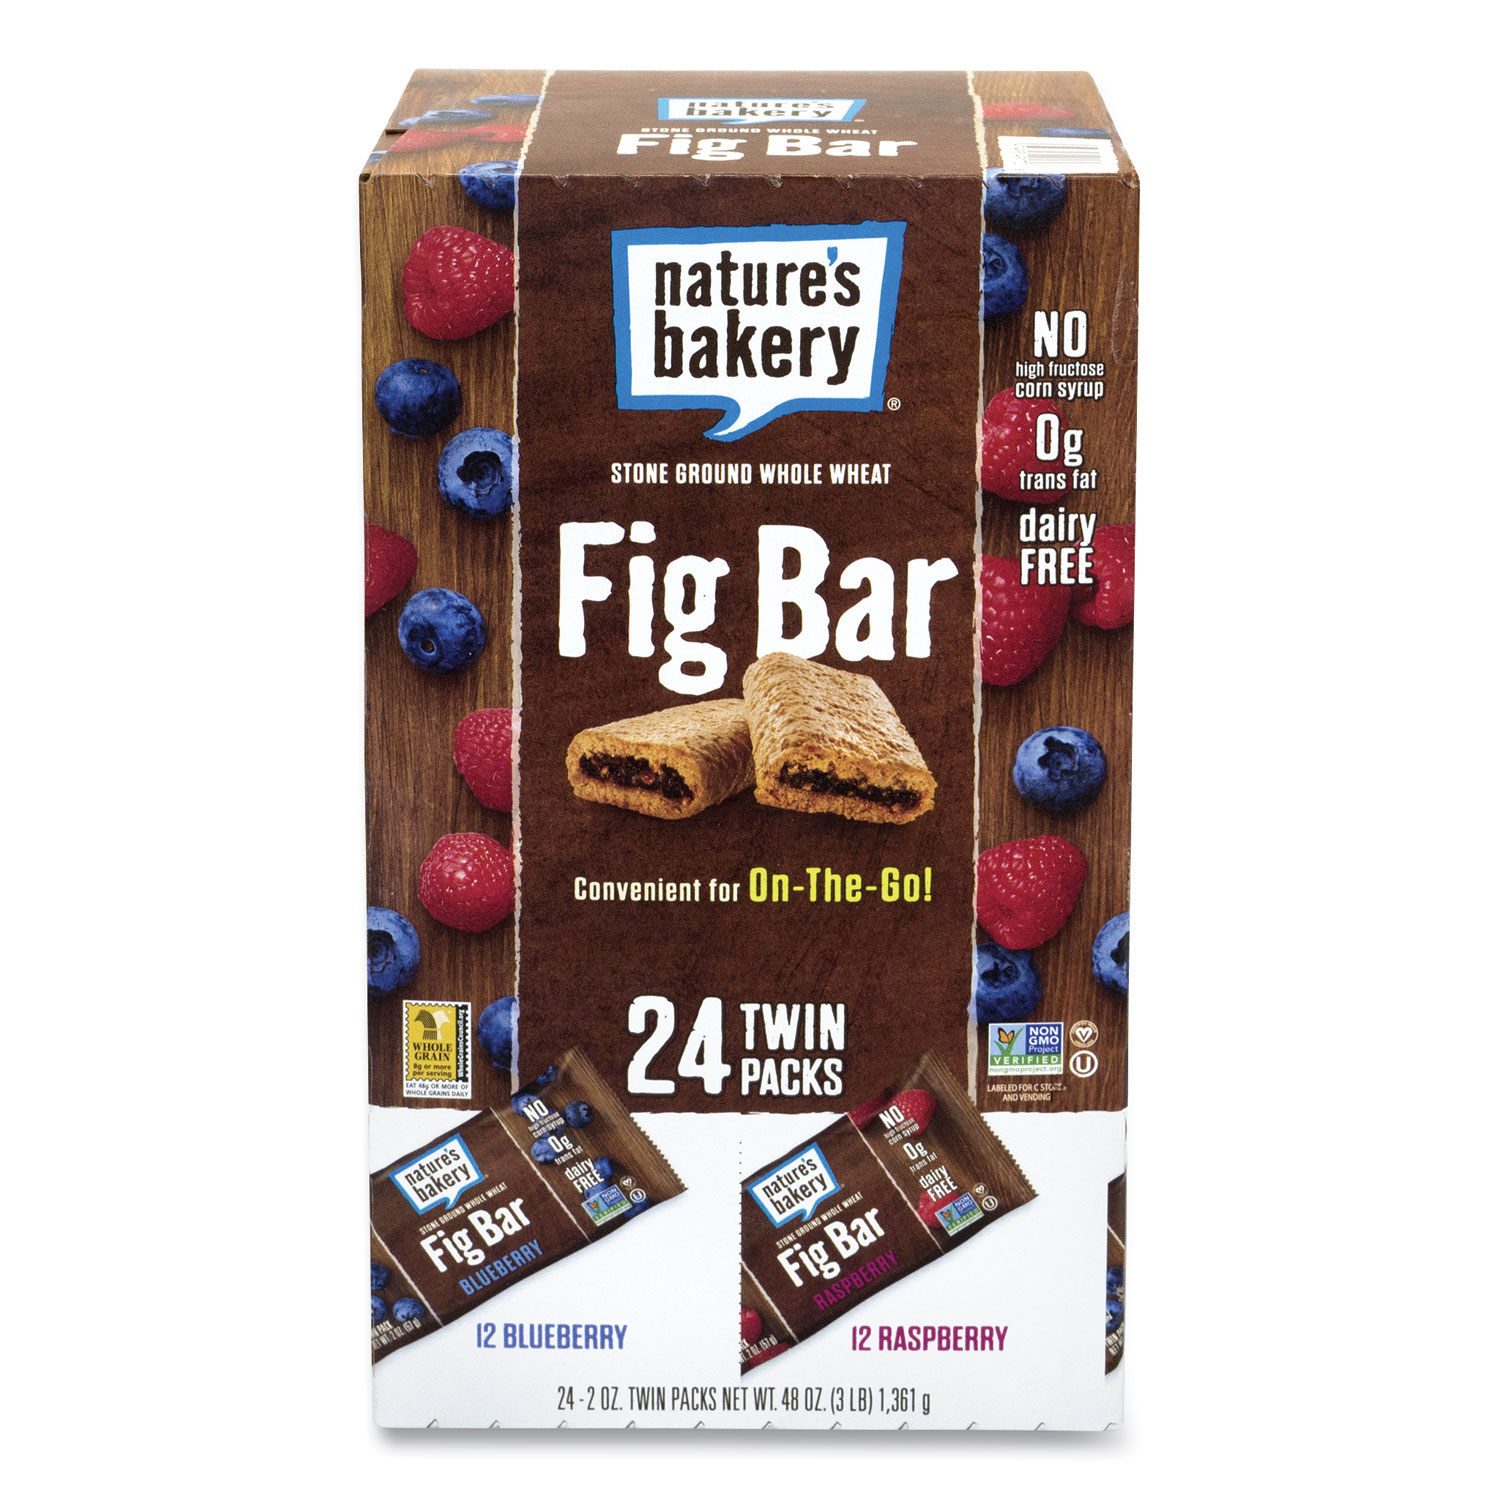  Nature's Bakery 49010 Fig Bars Variety Pack, 2 oz Twin Pack, 24 Twin Packs/Box, Free Delivery in 1-4 Business Days (GRR90000151) 